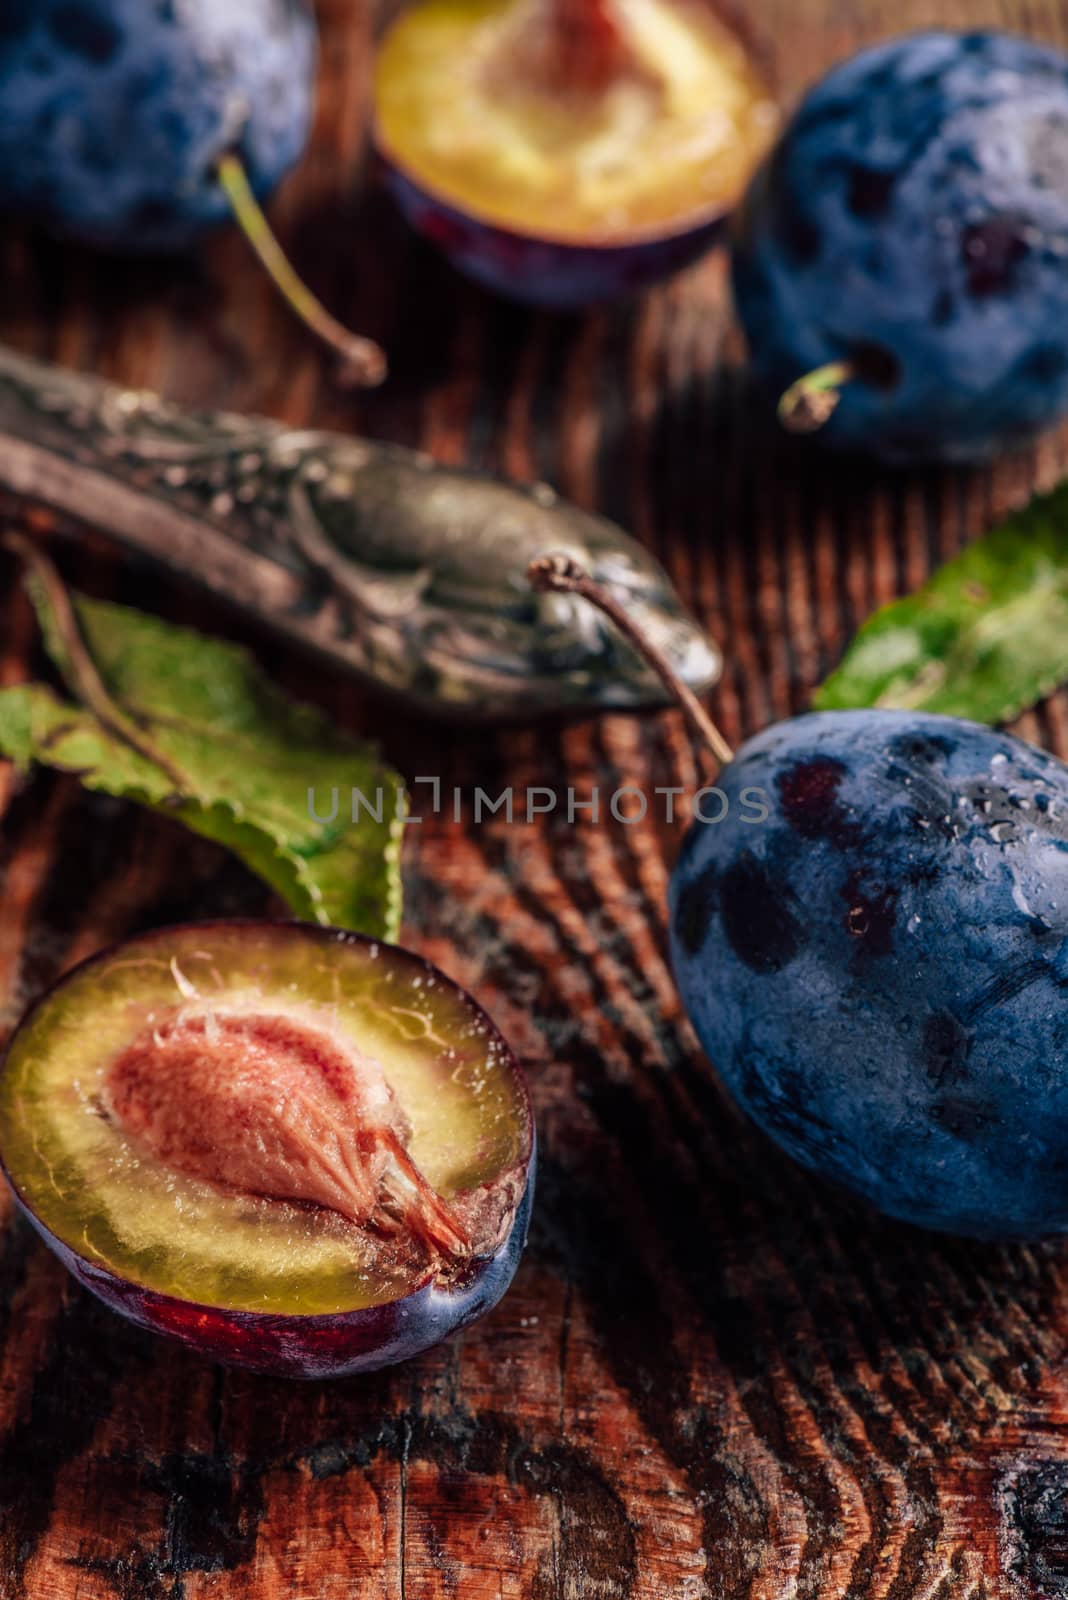 Ripe plums on wooden table with leaves, water drops and vintage knife